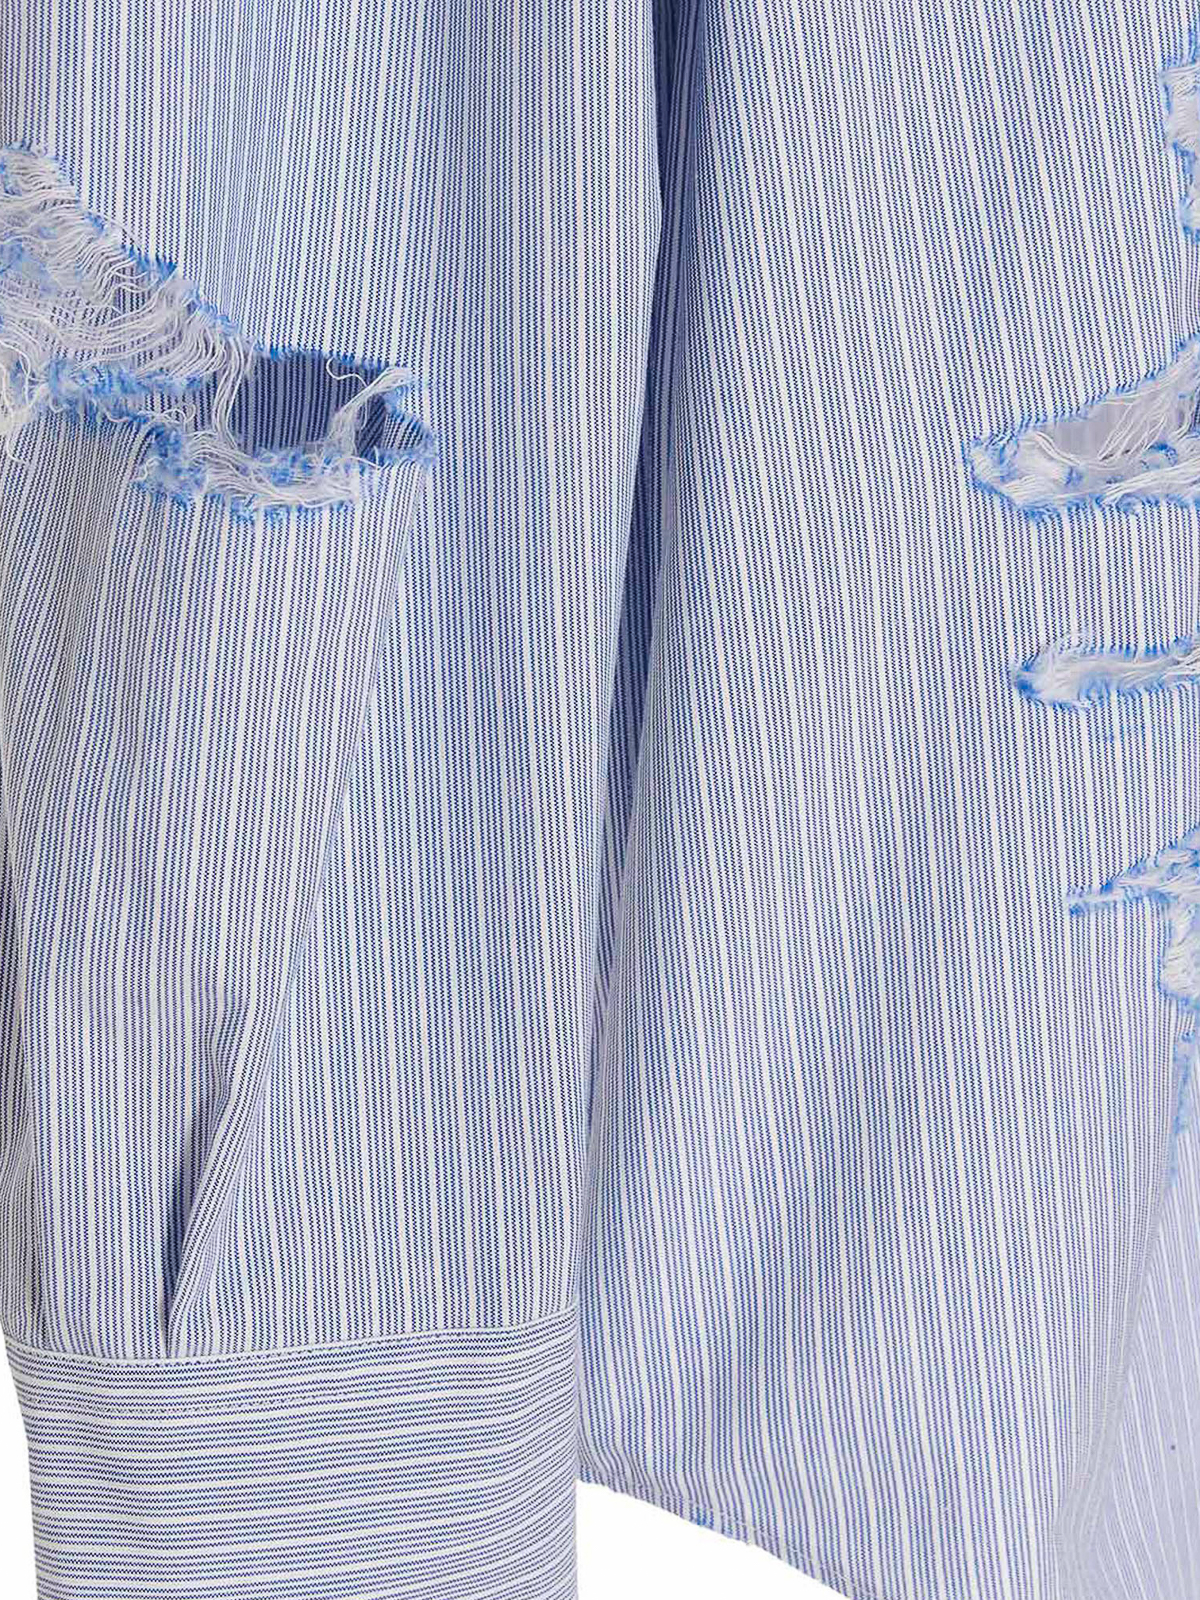 Shirts Doublet - destroyed striped shirt - 23SS17SH114BLUEWHITE